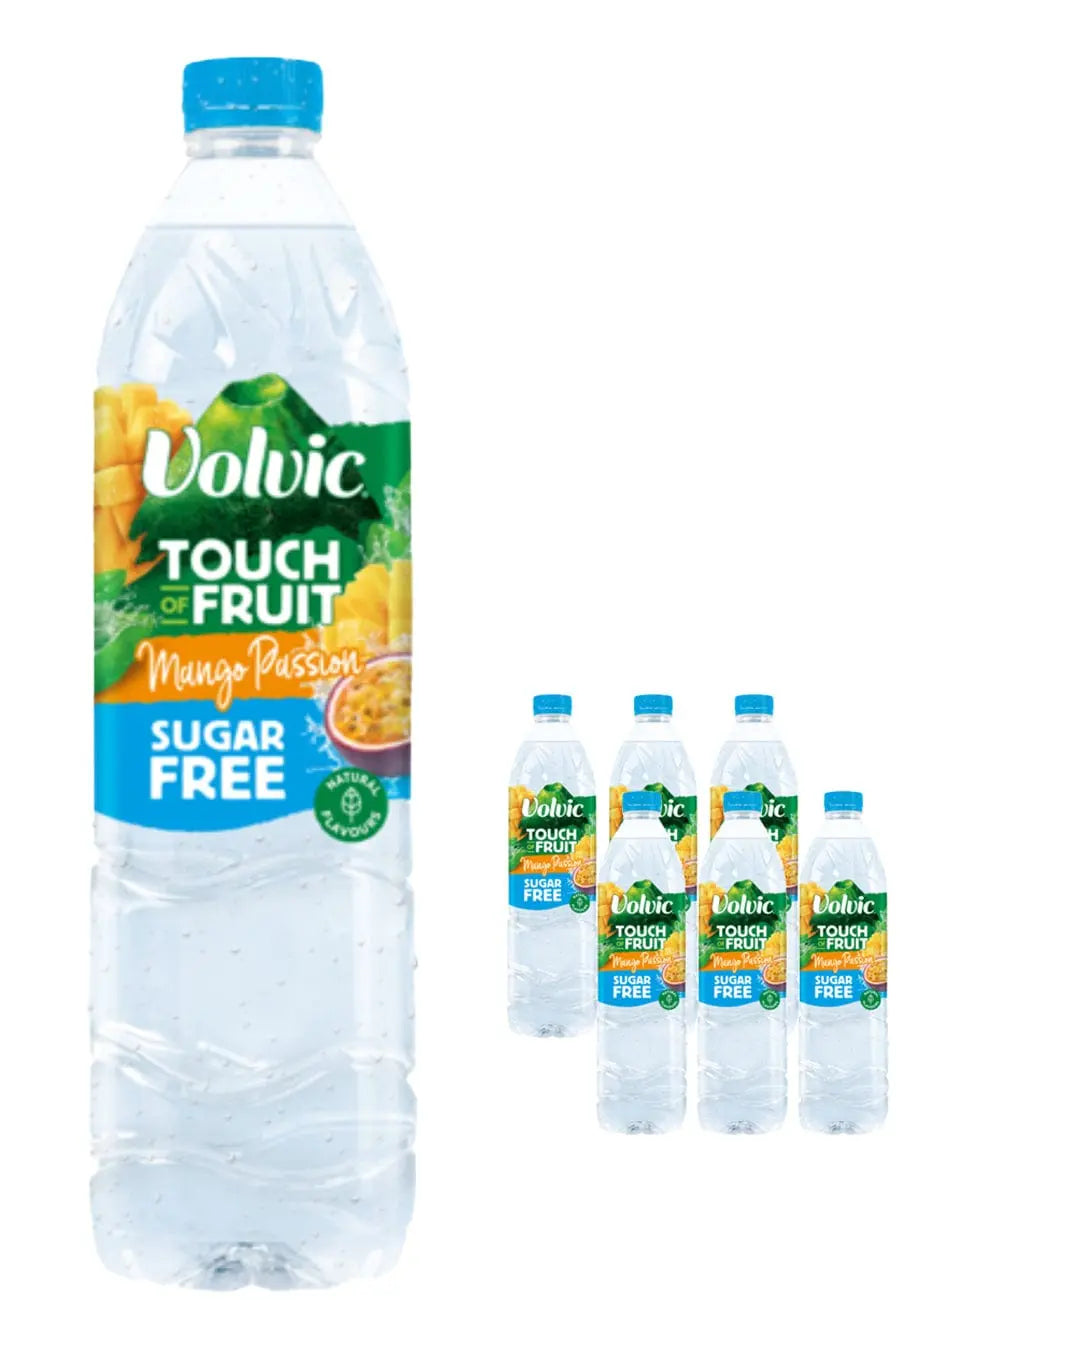 Volvic Sugar Free Touch of Fruit Mango Passion Flavoured Water Multipack, 6 x 1.5 L Water